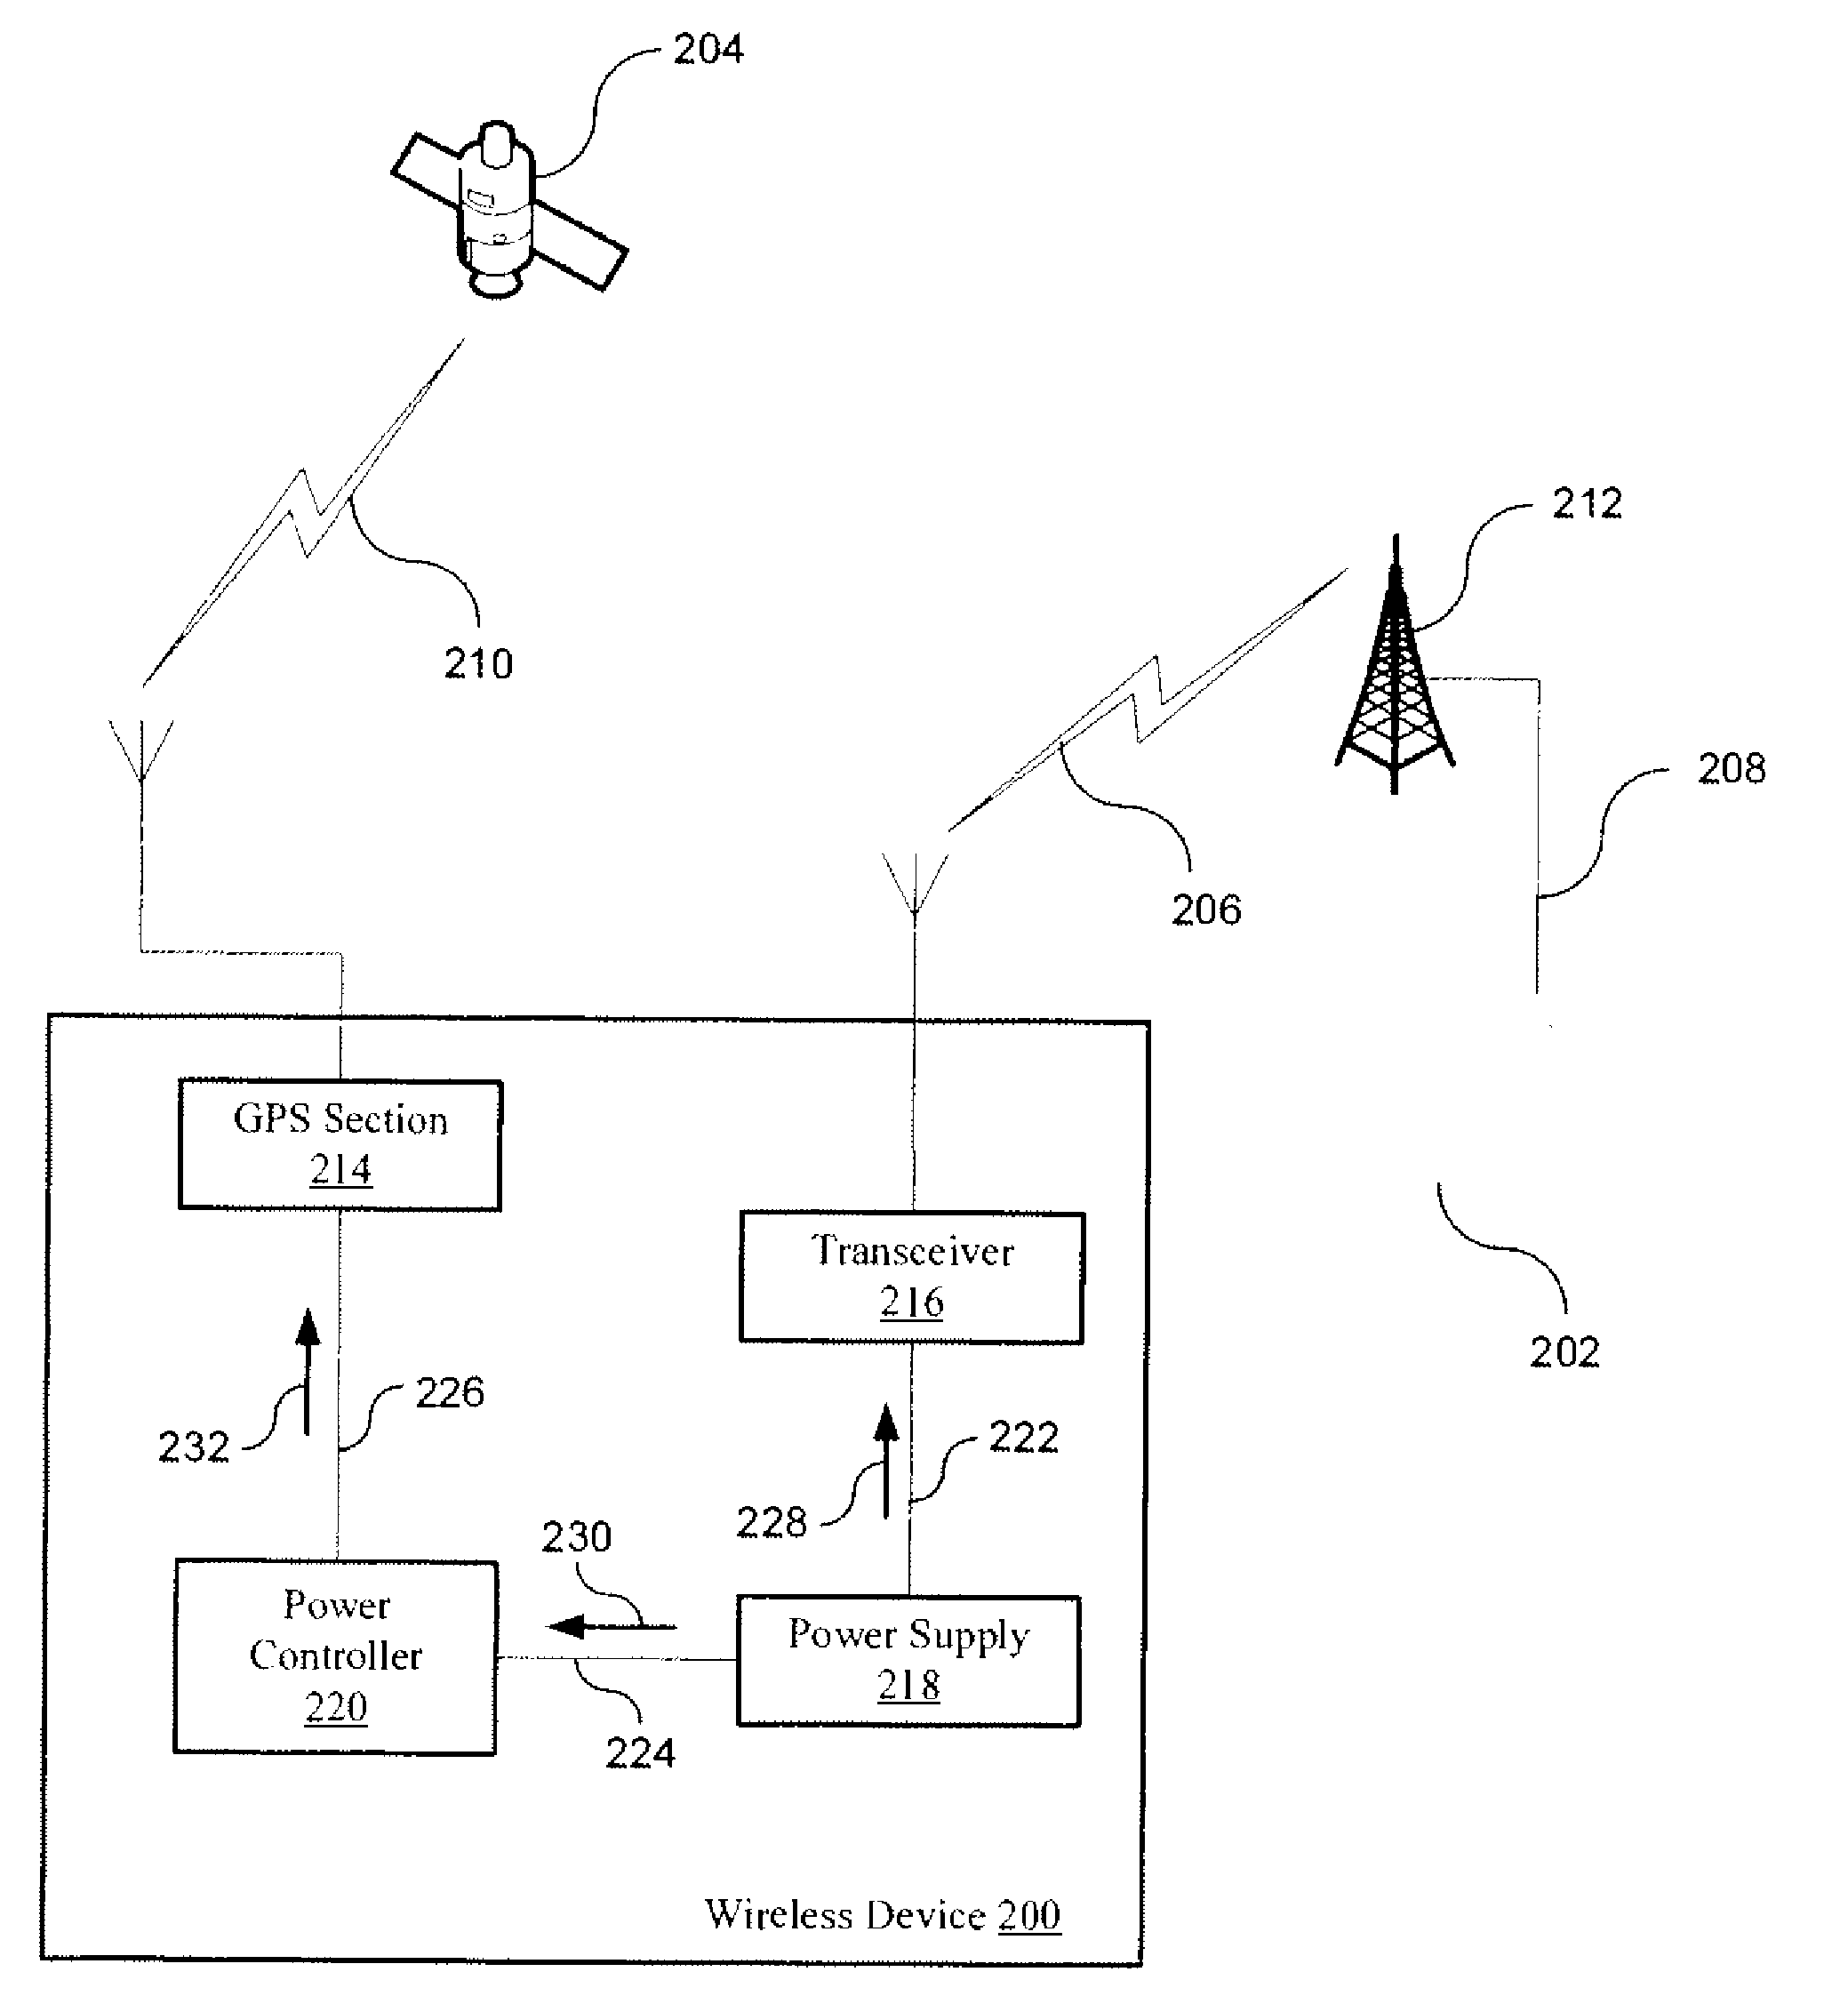 System and Method for Operating a GPS Device in a Micro Power Mode